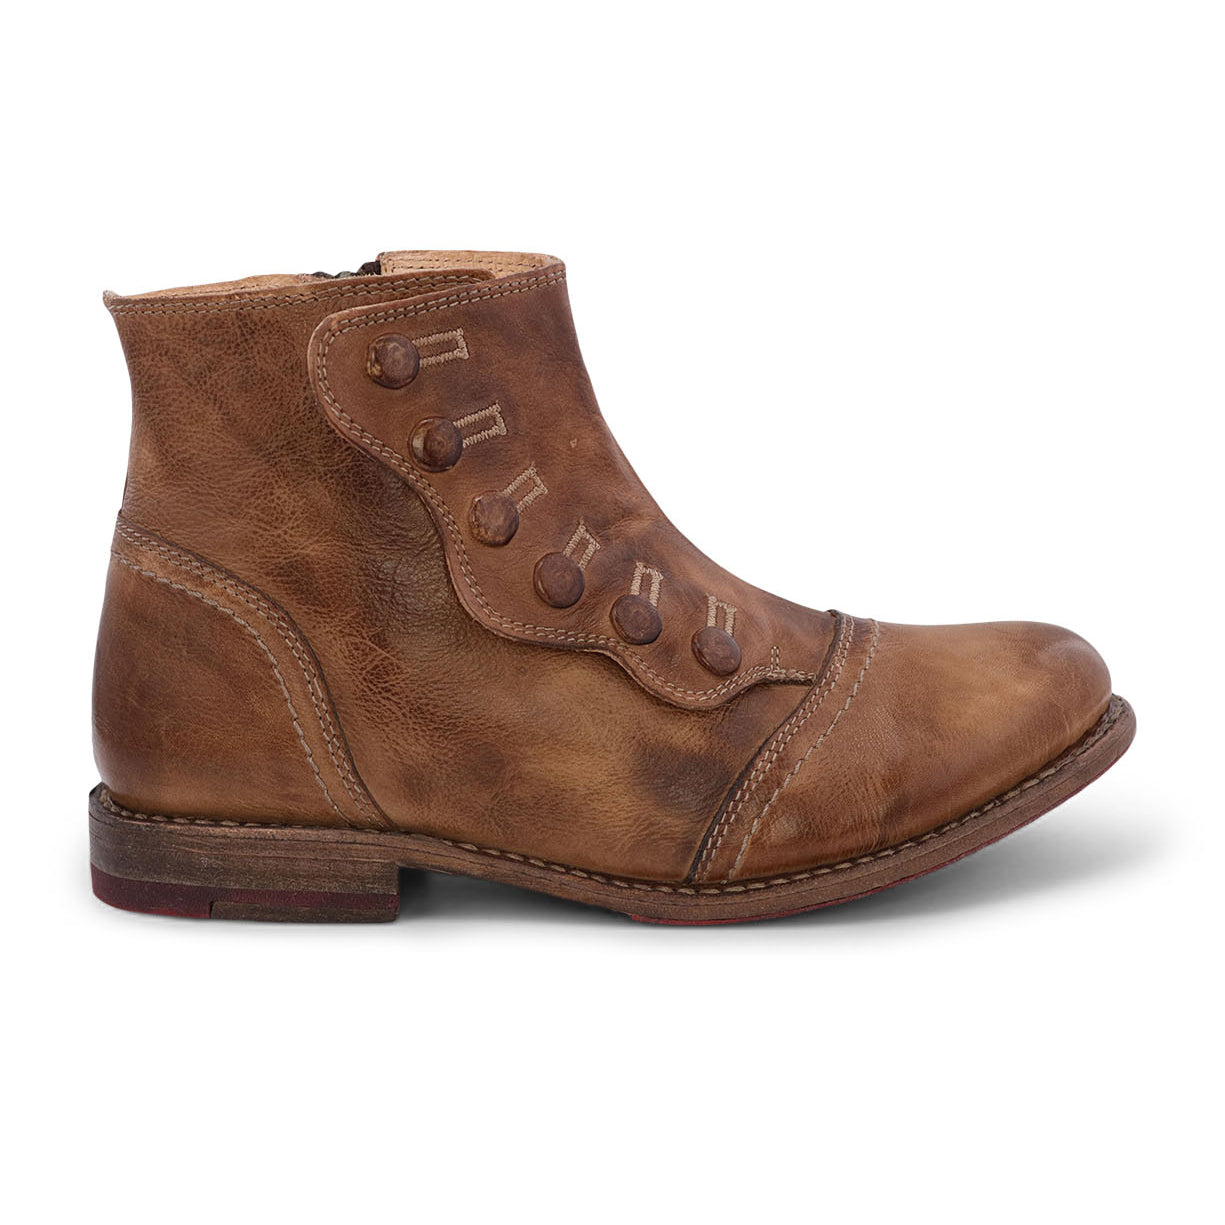 A women's tan leather ankle boot with YKK zipper, called Josephine by Oak Tree Farms.